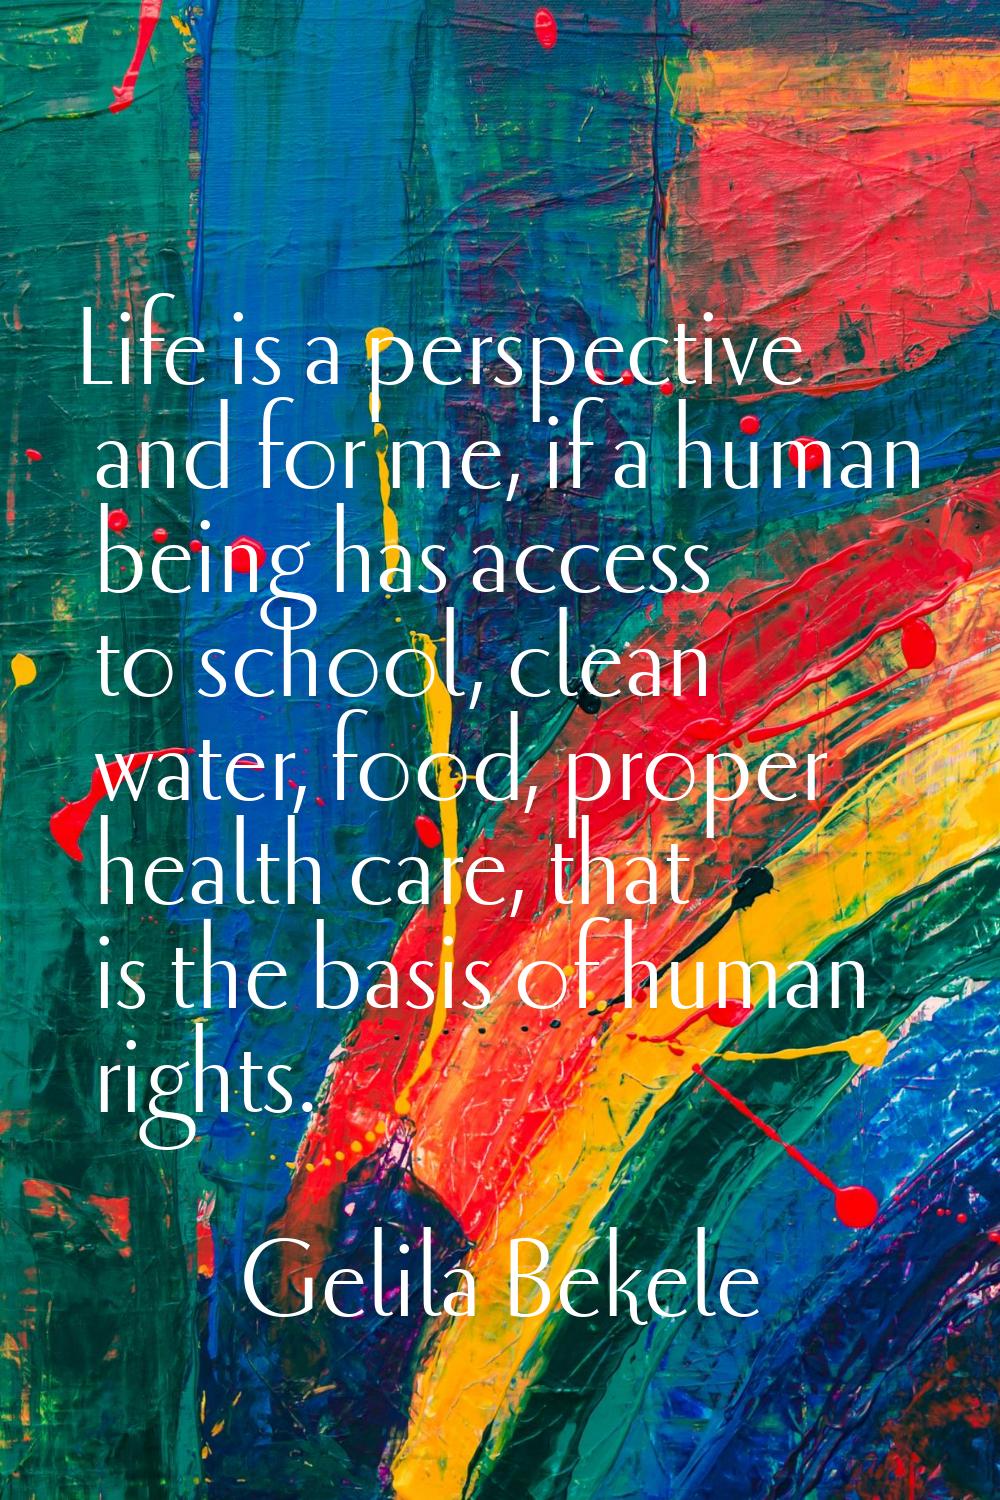 Life is a perspective and for me, if a human being has access to school, clean water, food, proper 